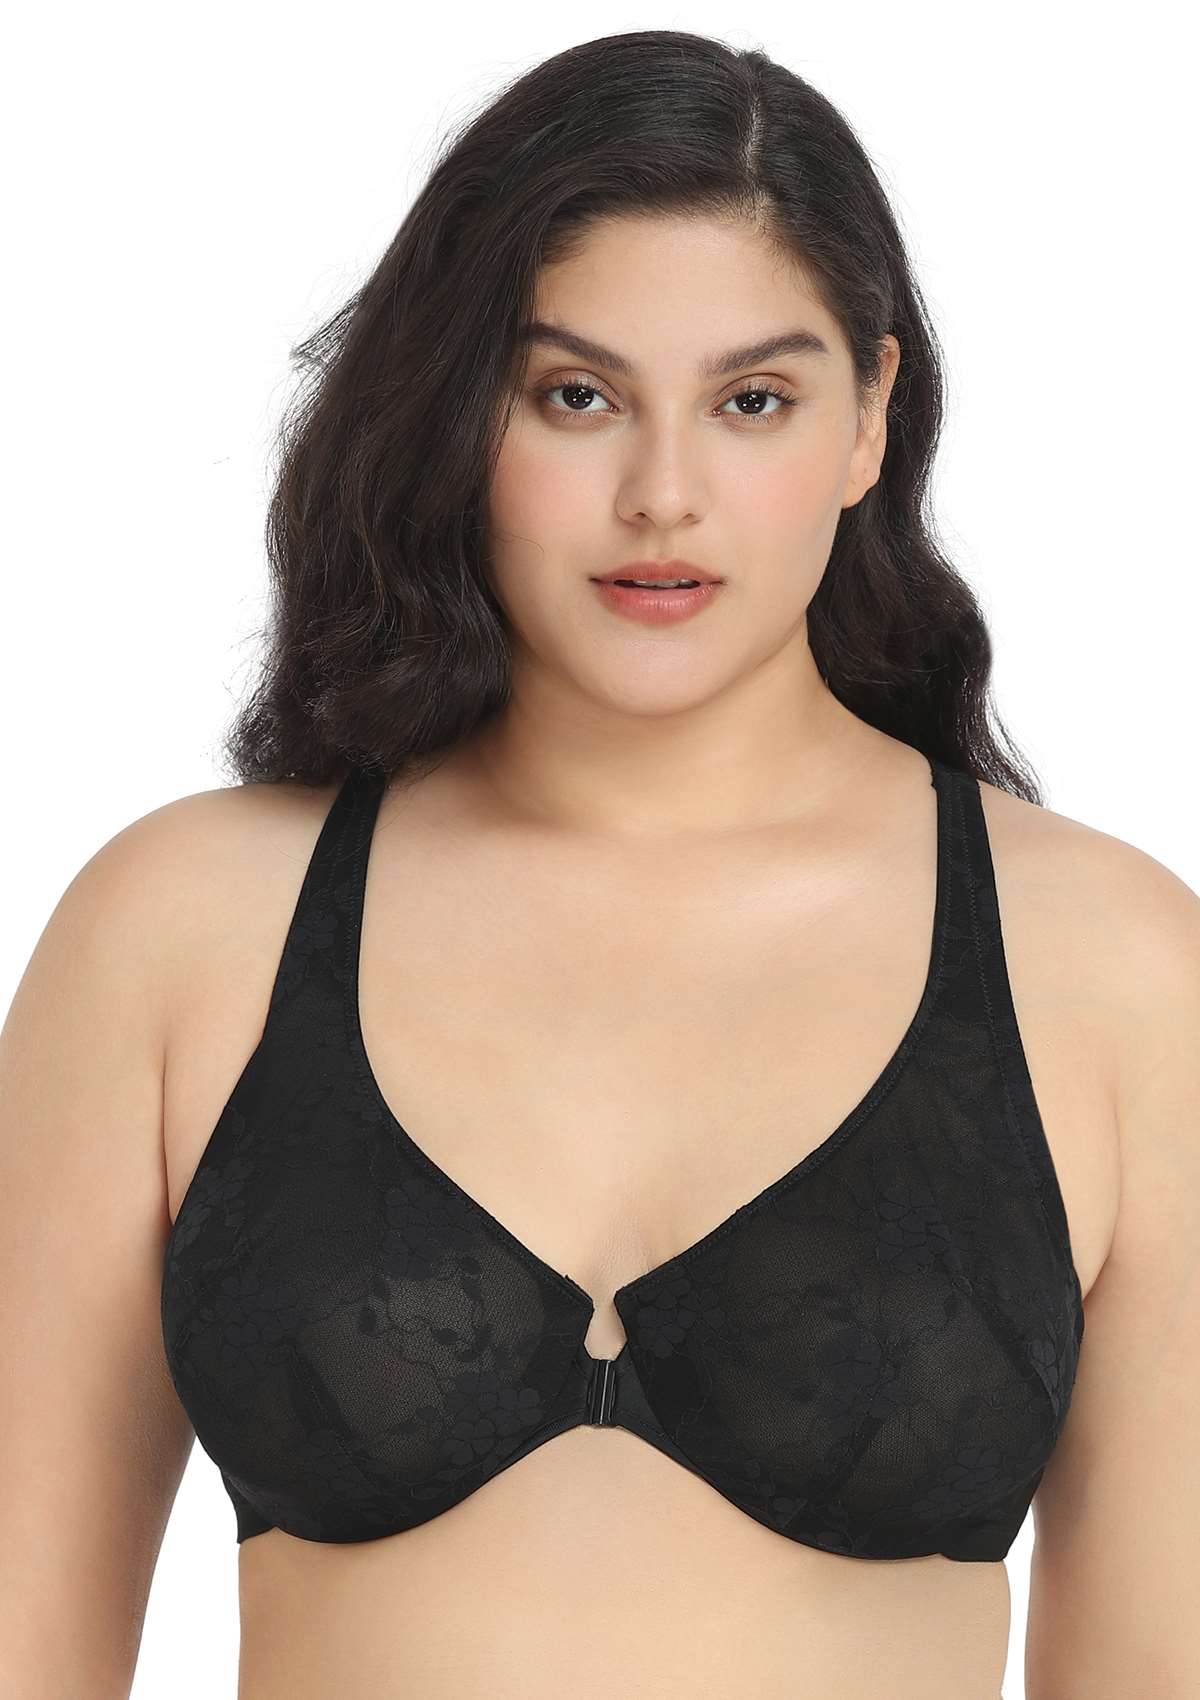 HSIA Spring Romance Front-Close Floral Lace Unlined Full Coverage Bra - Black / 38 / DDD/F